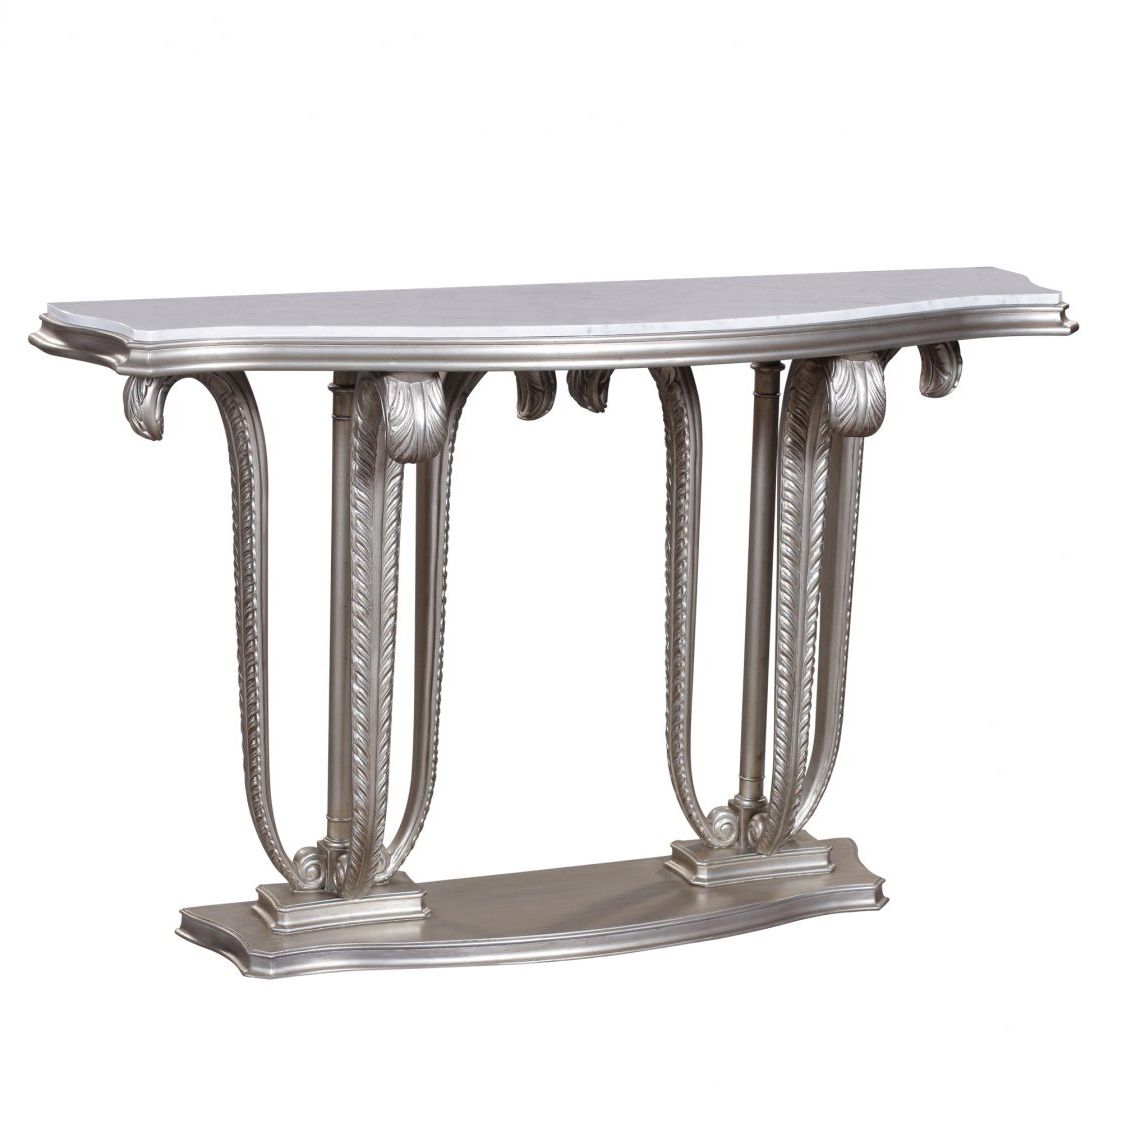 White Marble Console Tables In Most Current Console Table Plume White Marble (View 4 of 10)